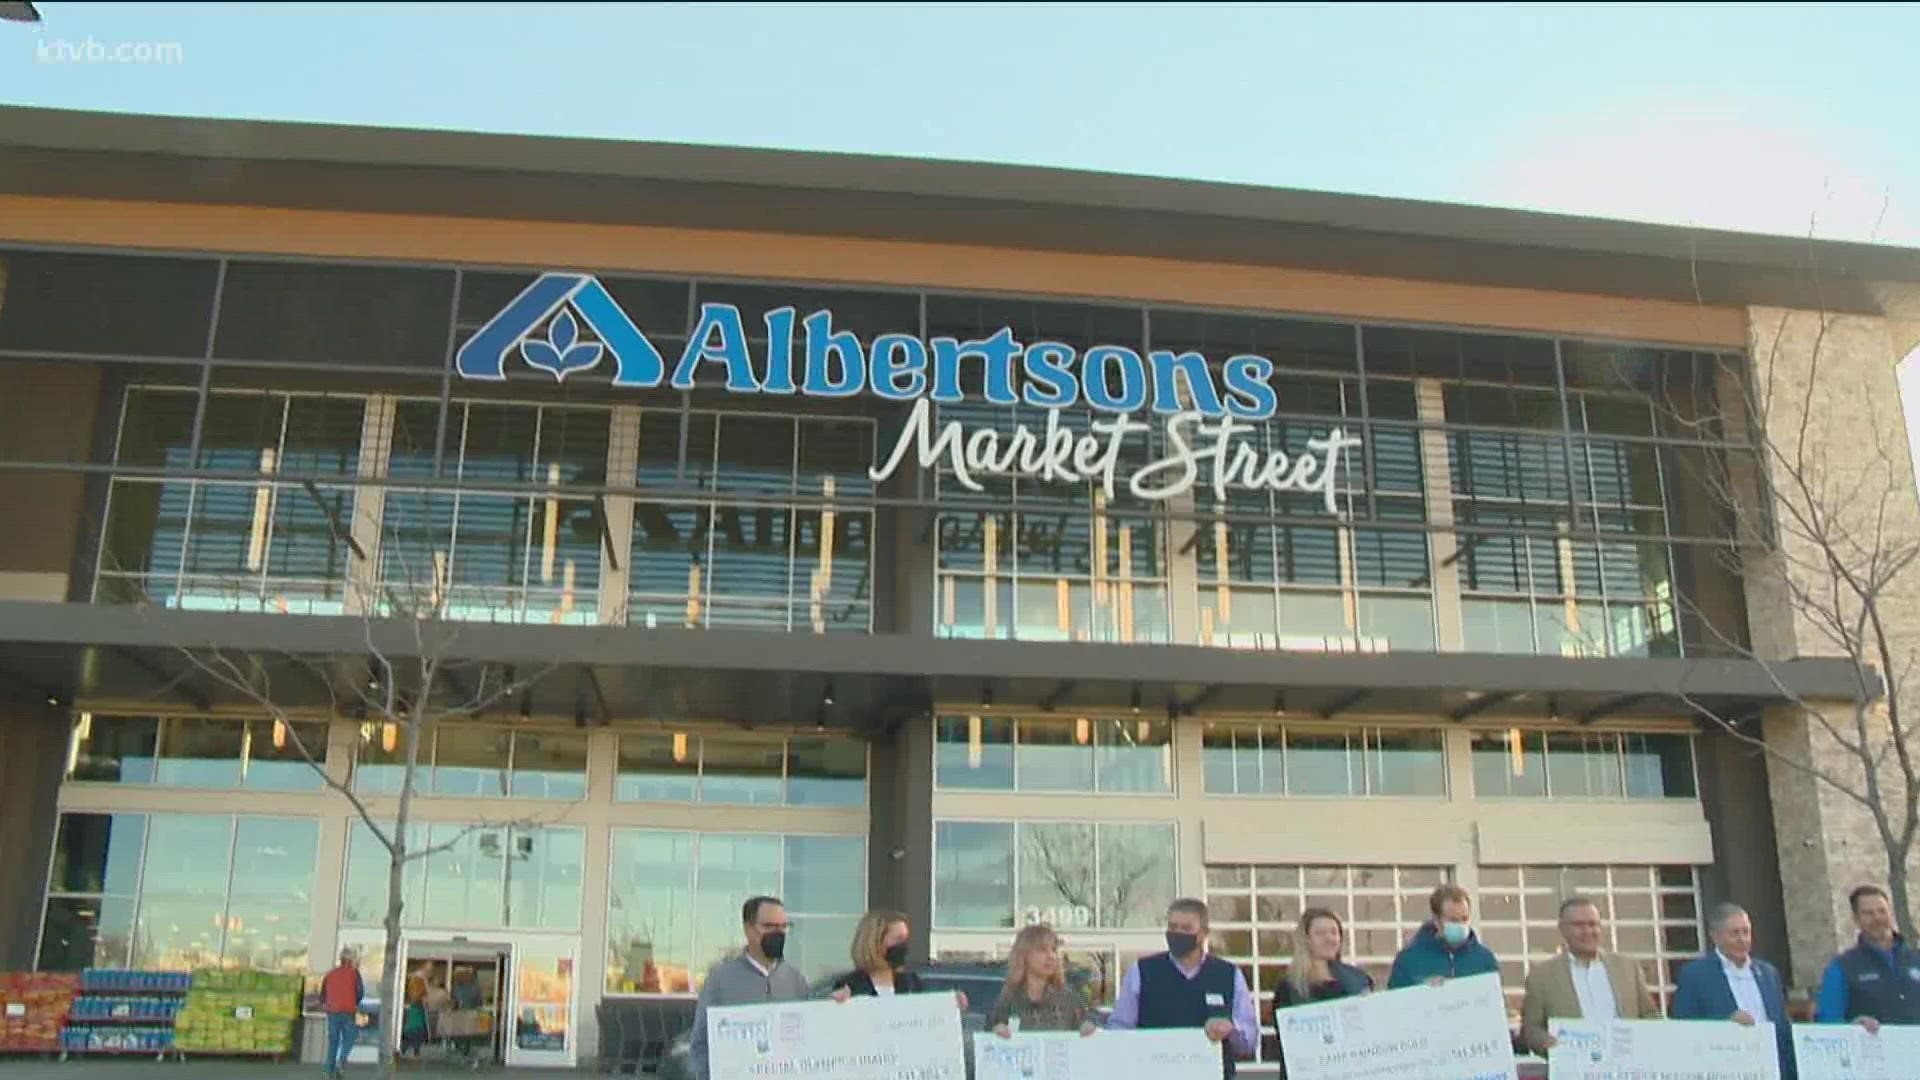 The Albertsons Boise Open has now given nearly $30 million to local charities across its 32-year history.